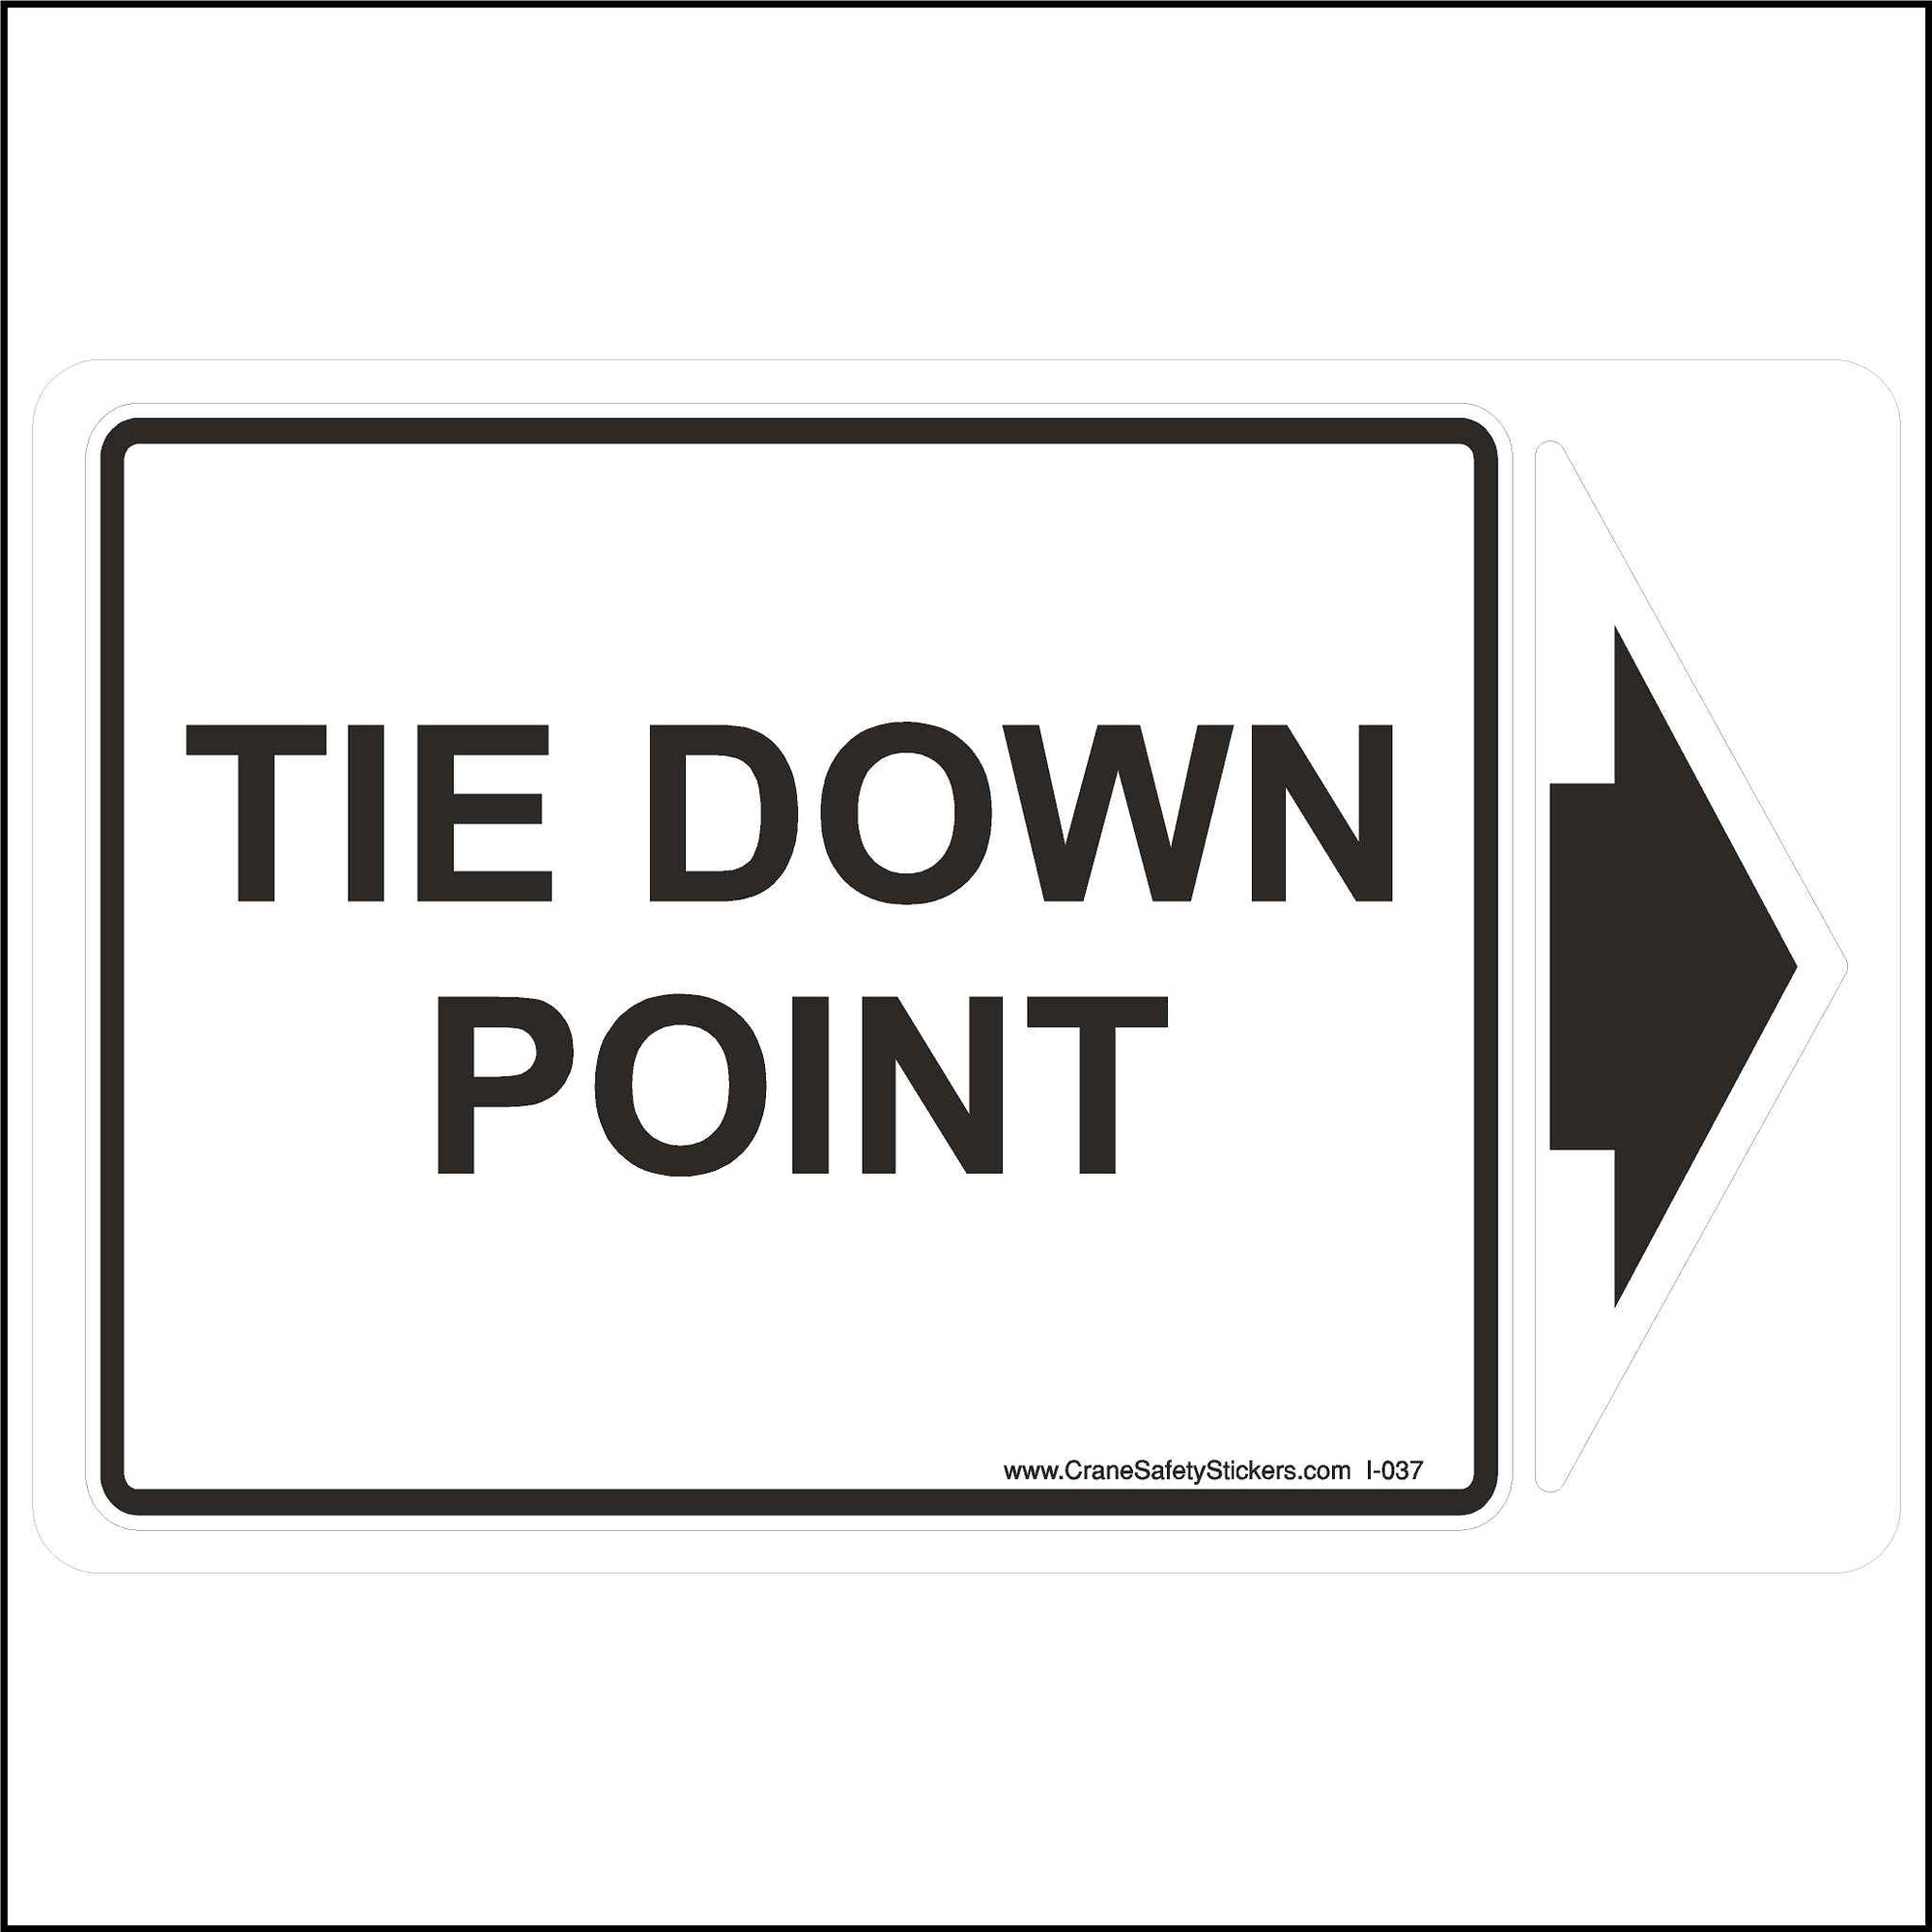 Tie Down Point Sticker and Label Printed in Black and White.